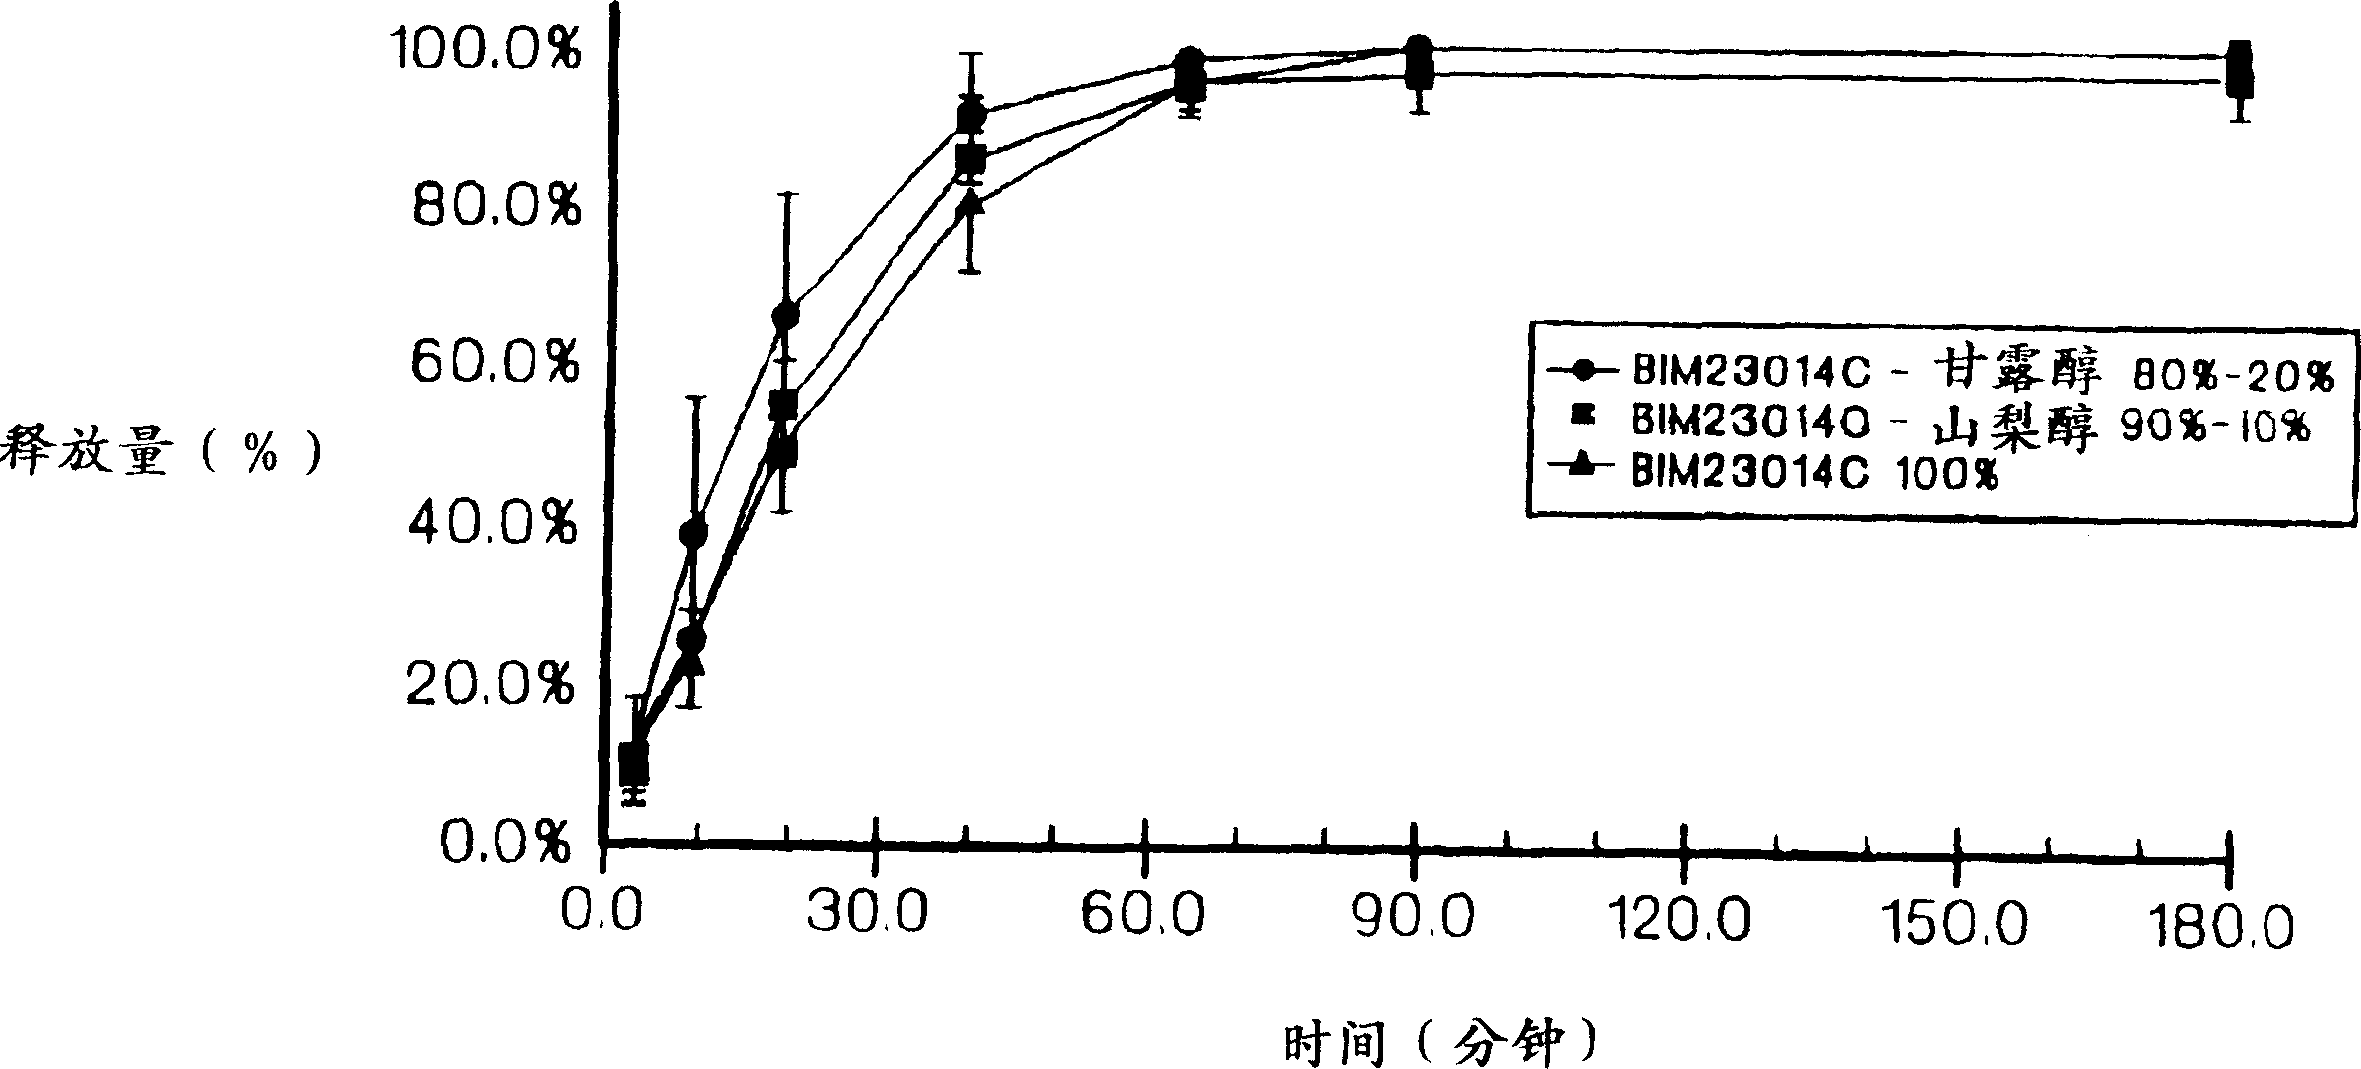 Sustained release of peptides from pharmaceutical compositions